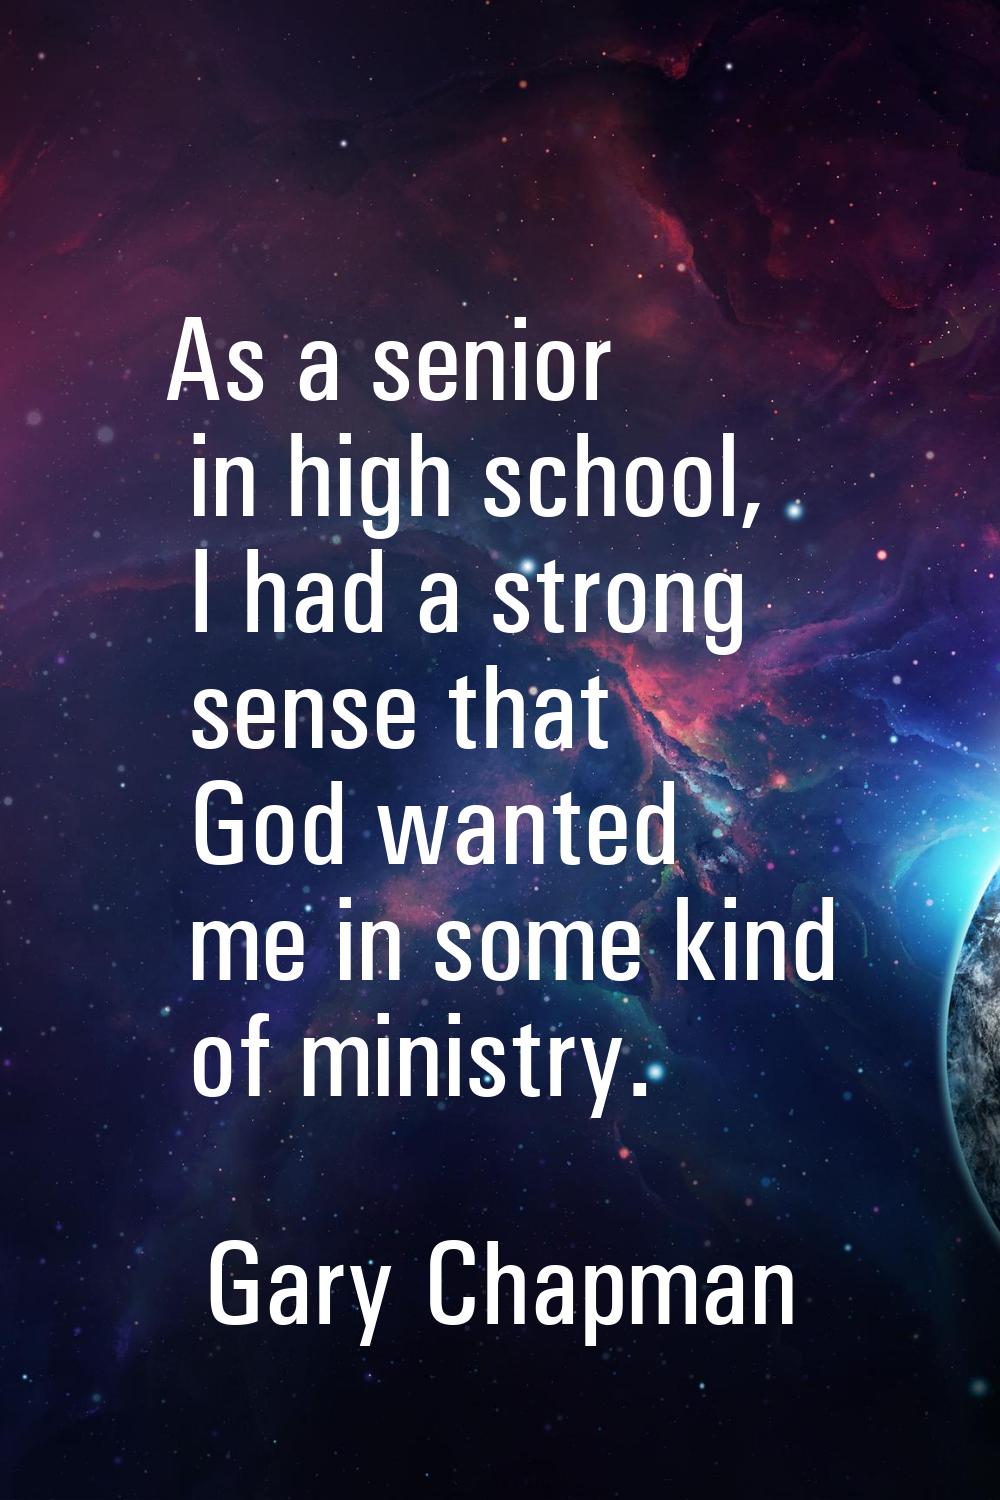 As a senior in high school, I had a strong sense that God wanted me in some kind of ministry.